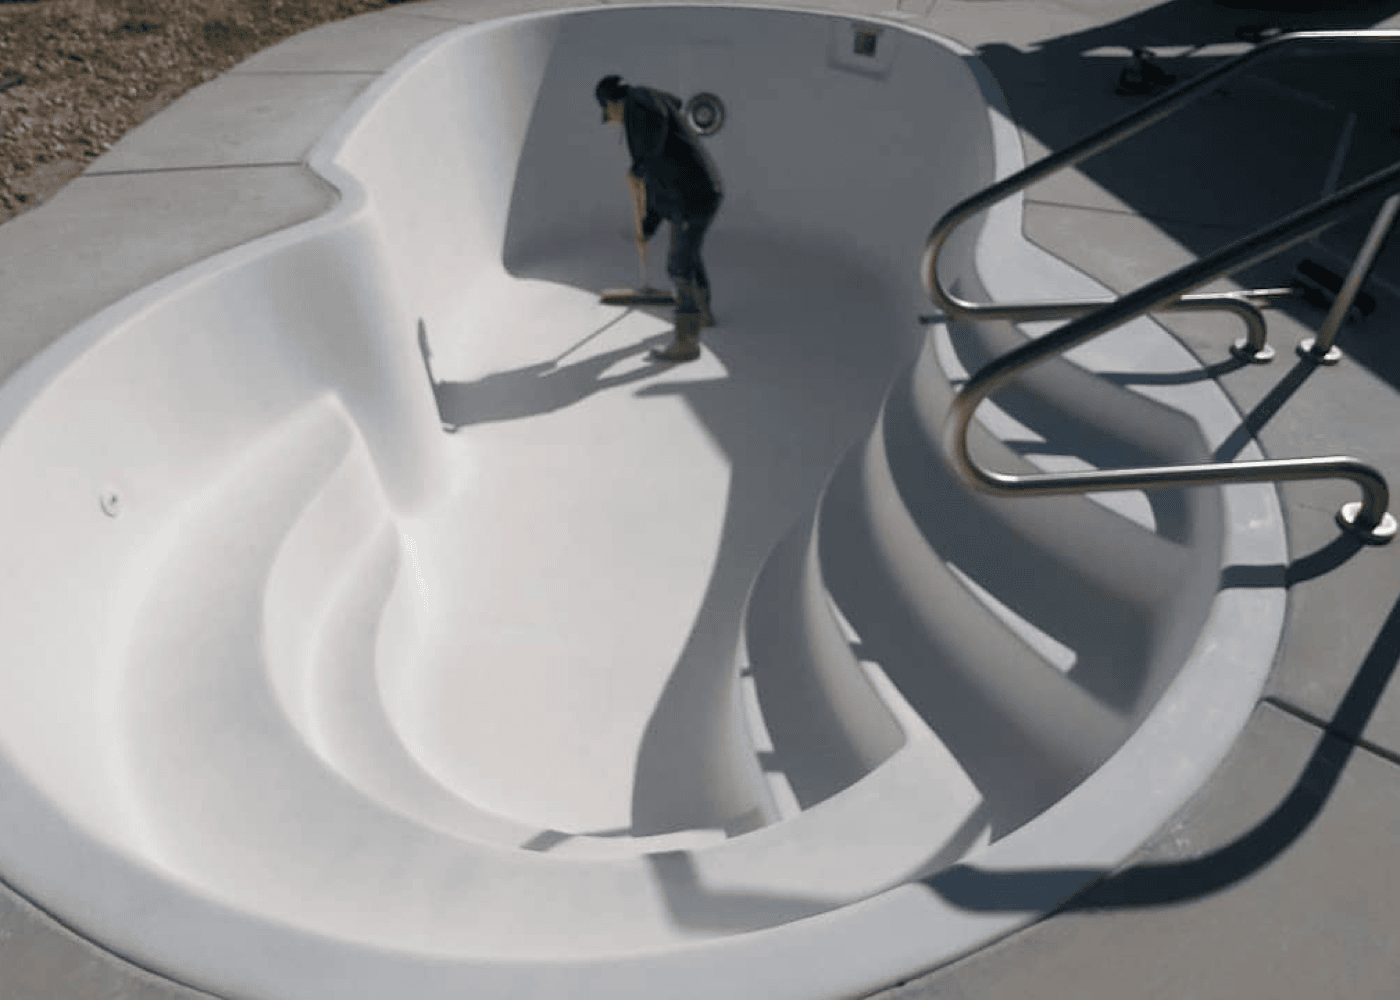 A person cleaning an empty in-ground pool seen from a higher angle.